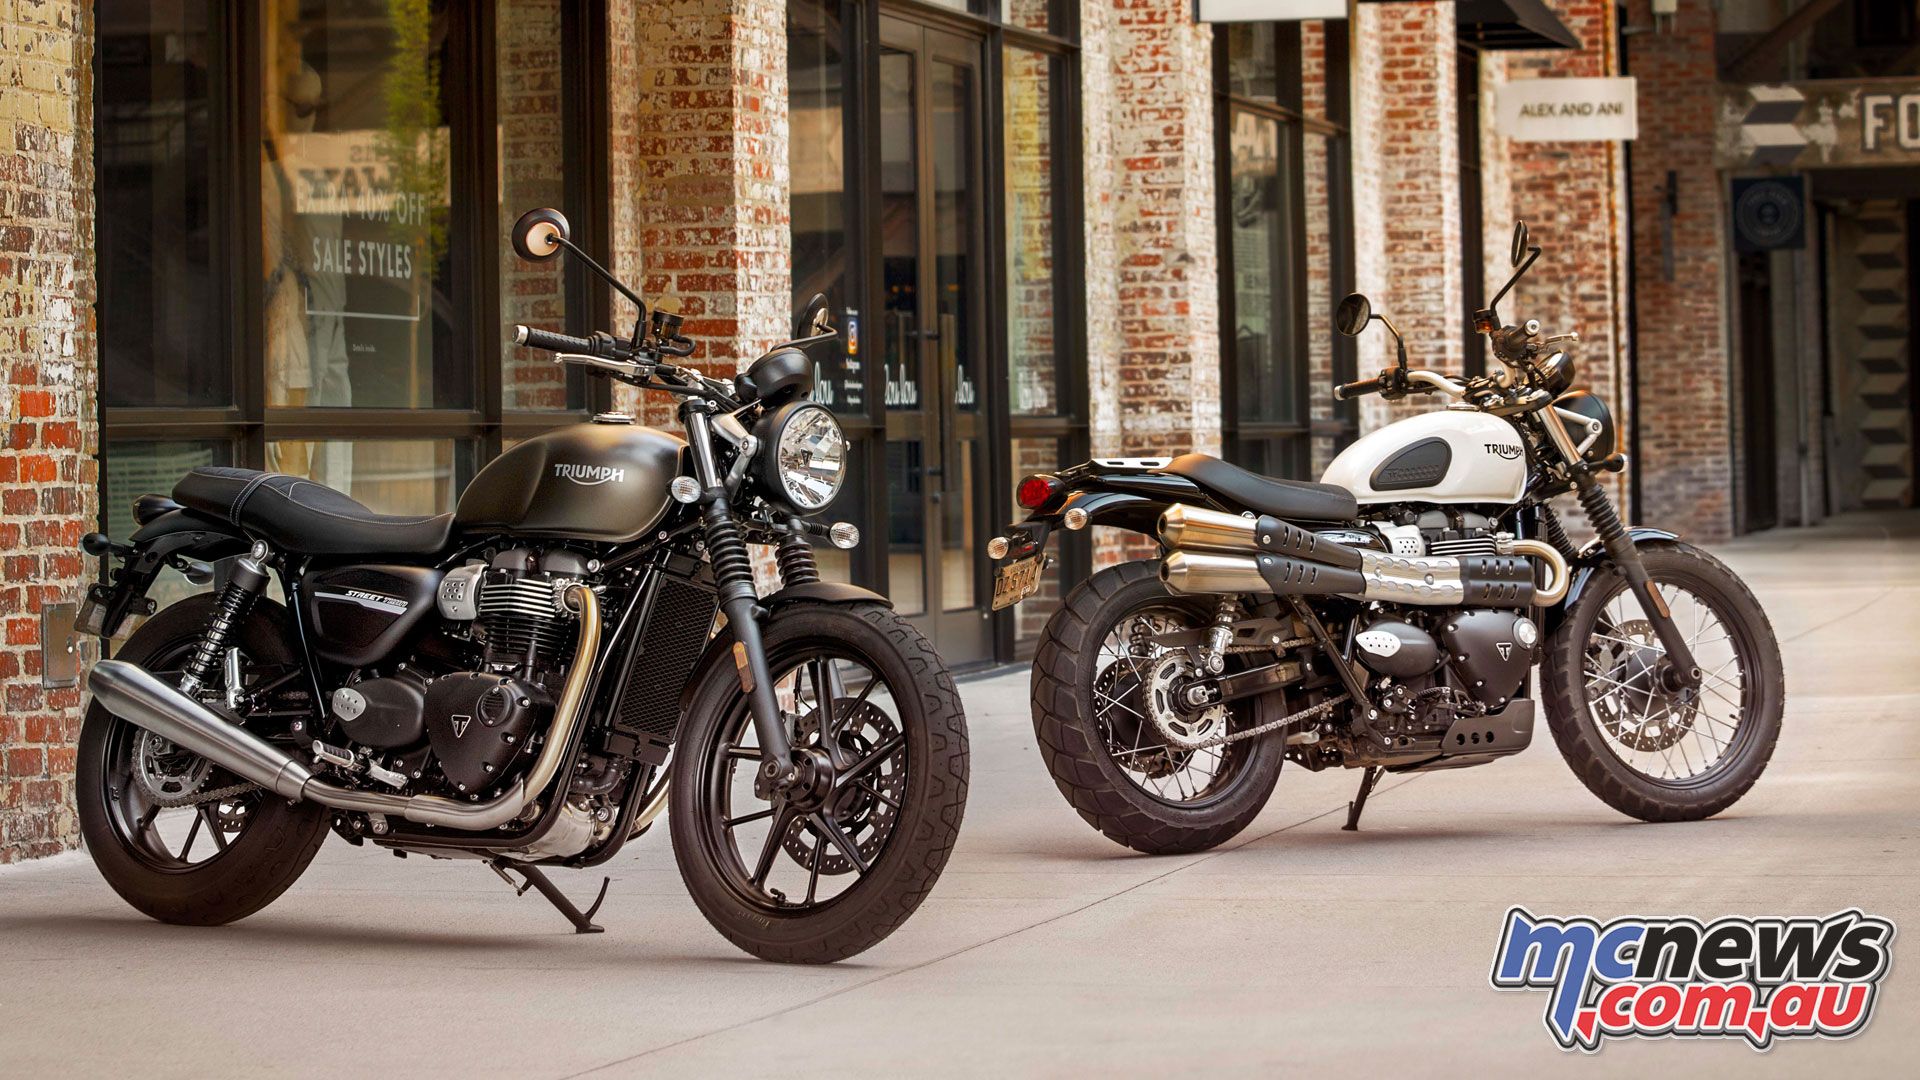 Triumph Street Twin updated. +10hp. New forks & brakes. Motorcycle News, Sport and Reviews